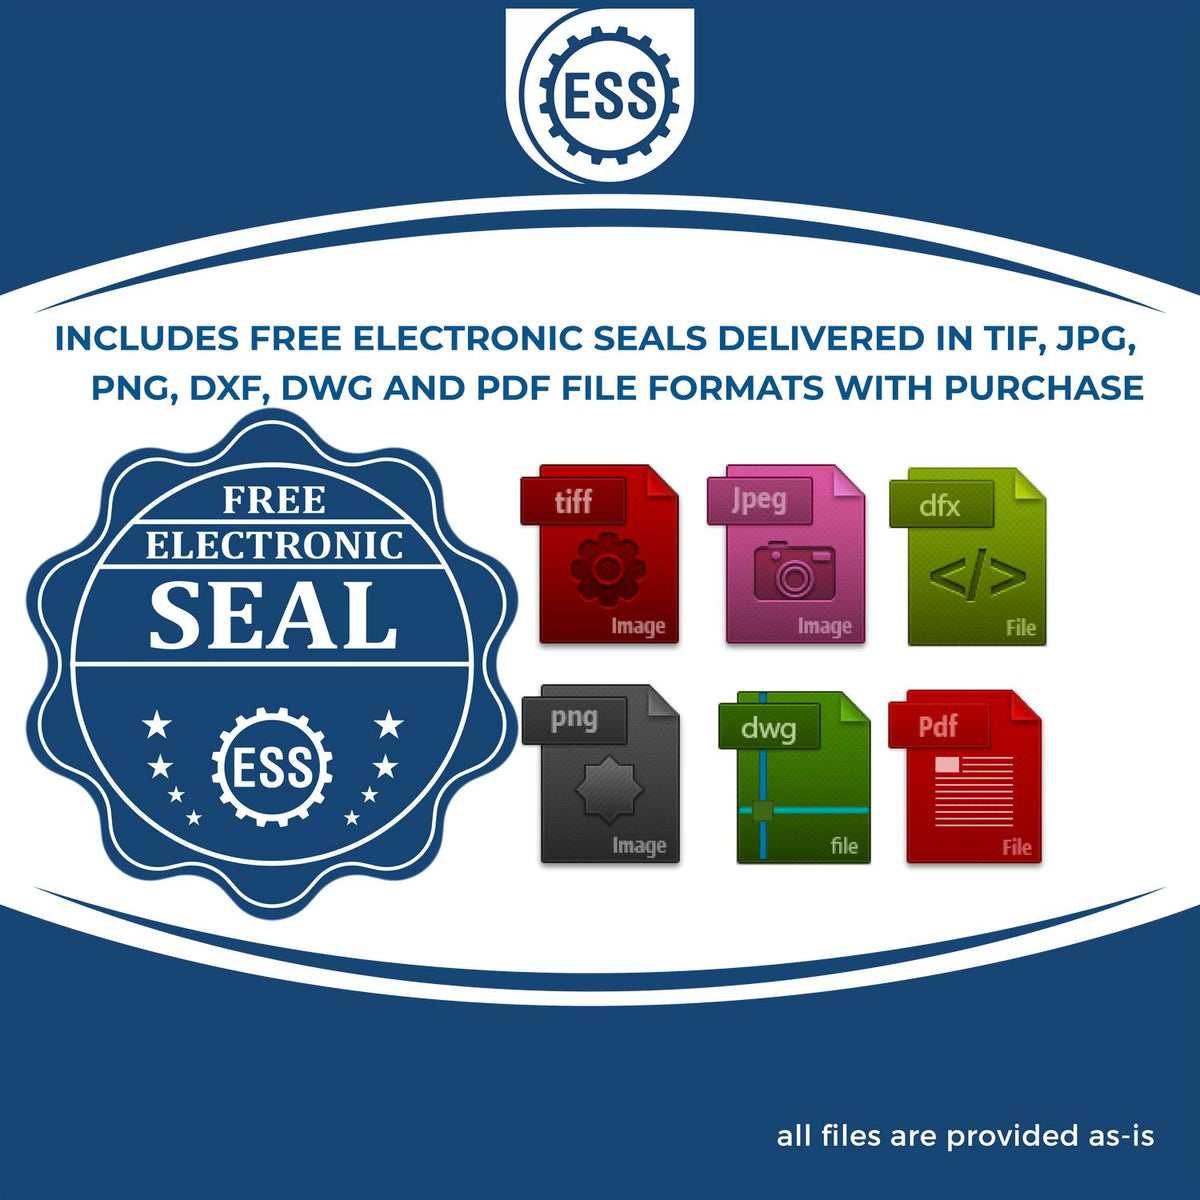 An infographic for the free electronic seal for the MaxLight Premium Pre-Inked South Carolina State Seal Notarial Stamp illustrating the different file type icons such as DXF, DWG, TIF, JPG and PNG.